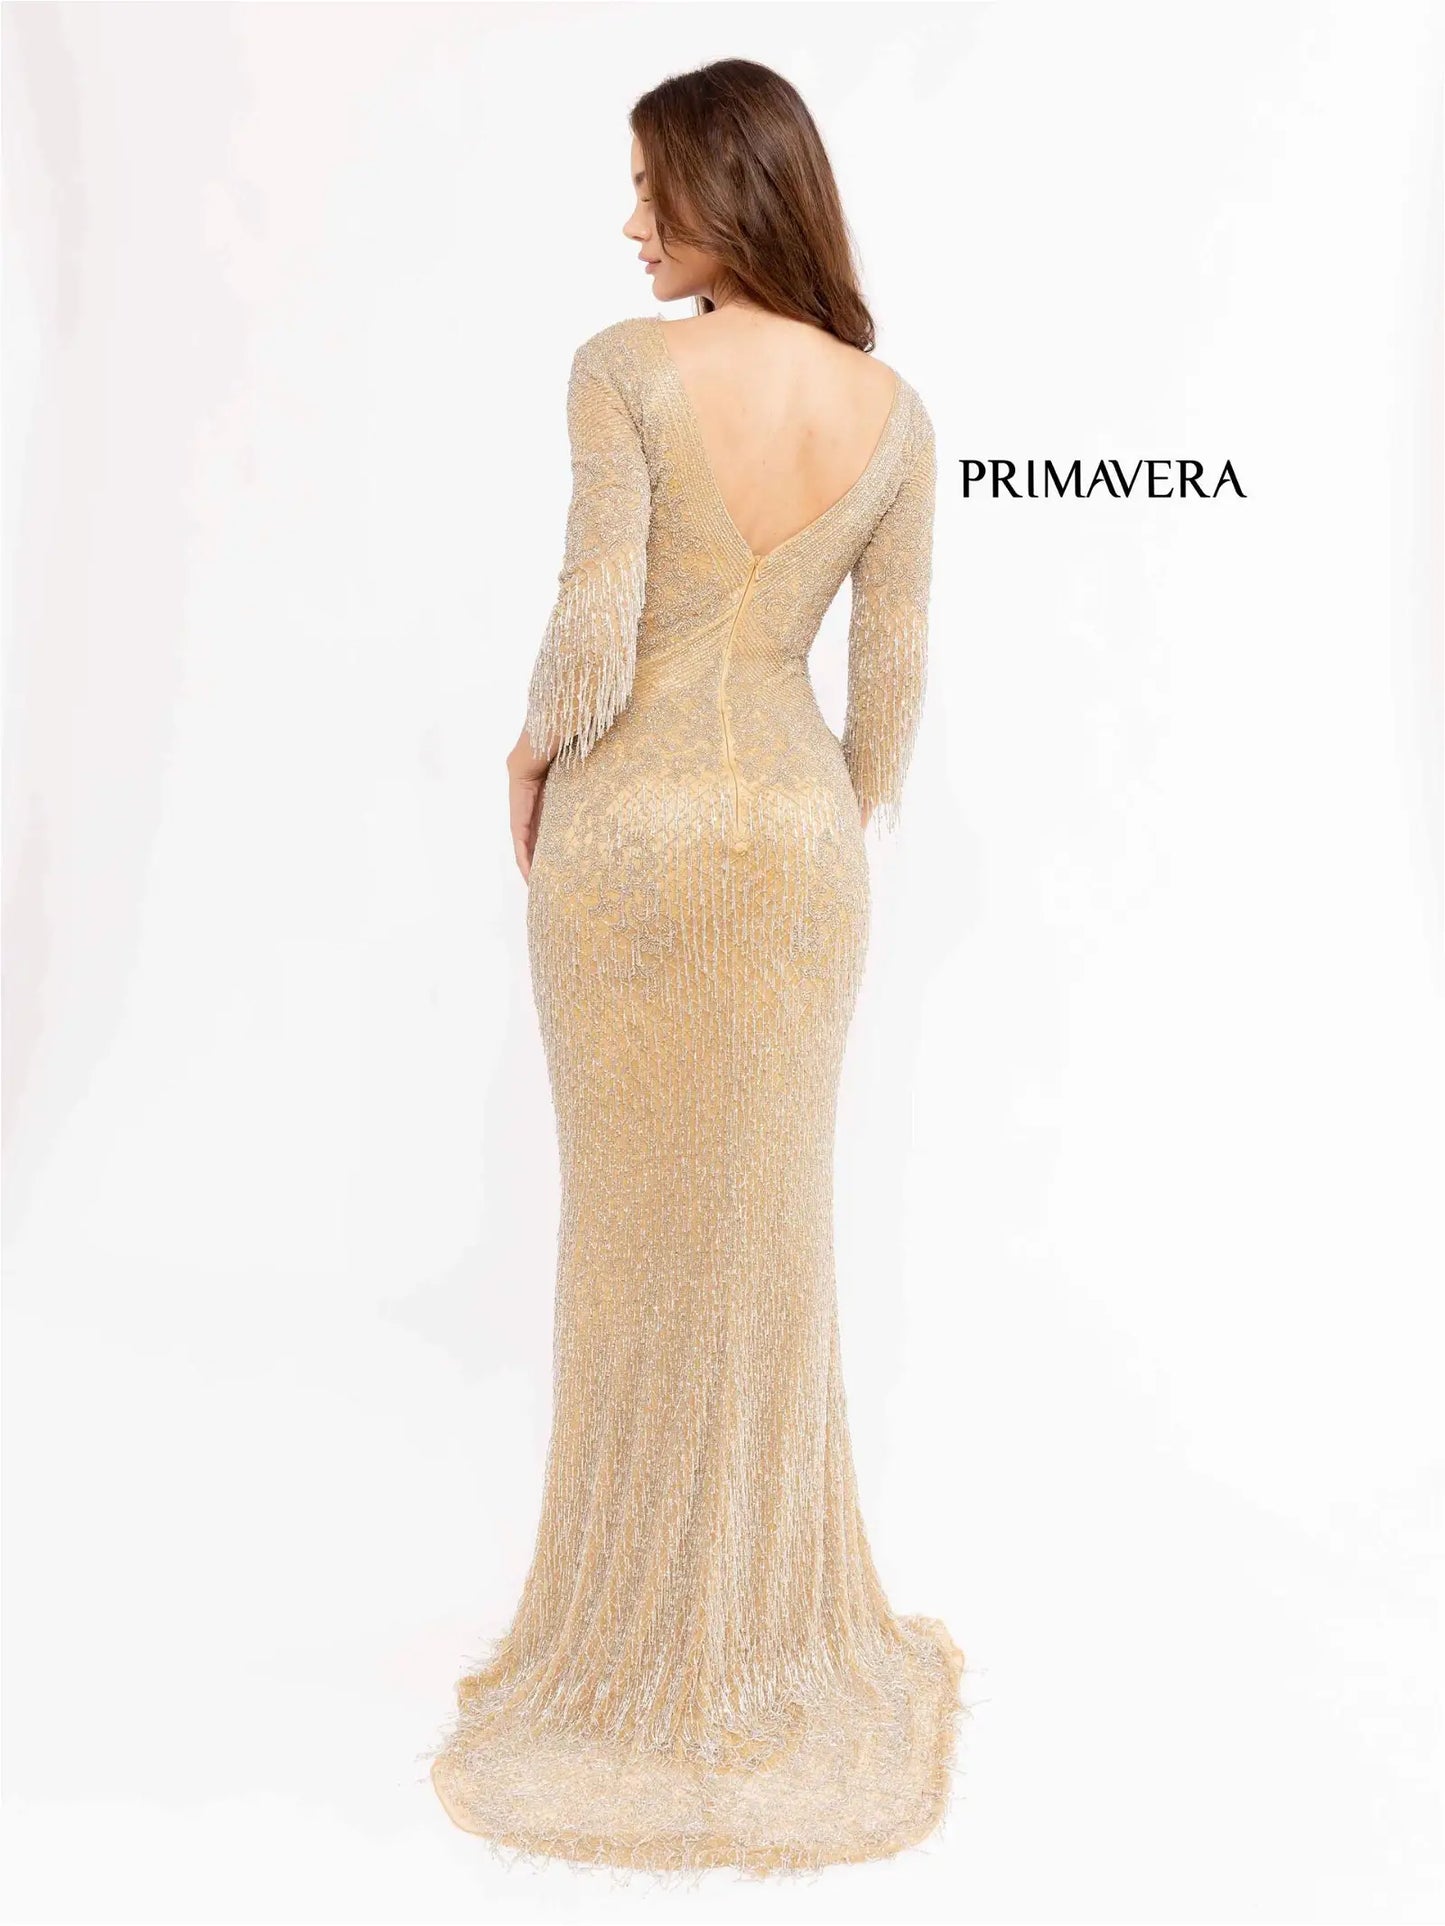 Primavera Couture 12032 Prom Dress Long Beaded Gown. Such a beautiful gown with 3 quarter sleeves and it has FRINDGE!!!!!